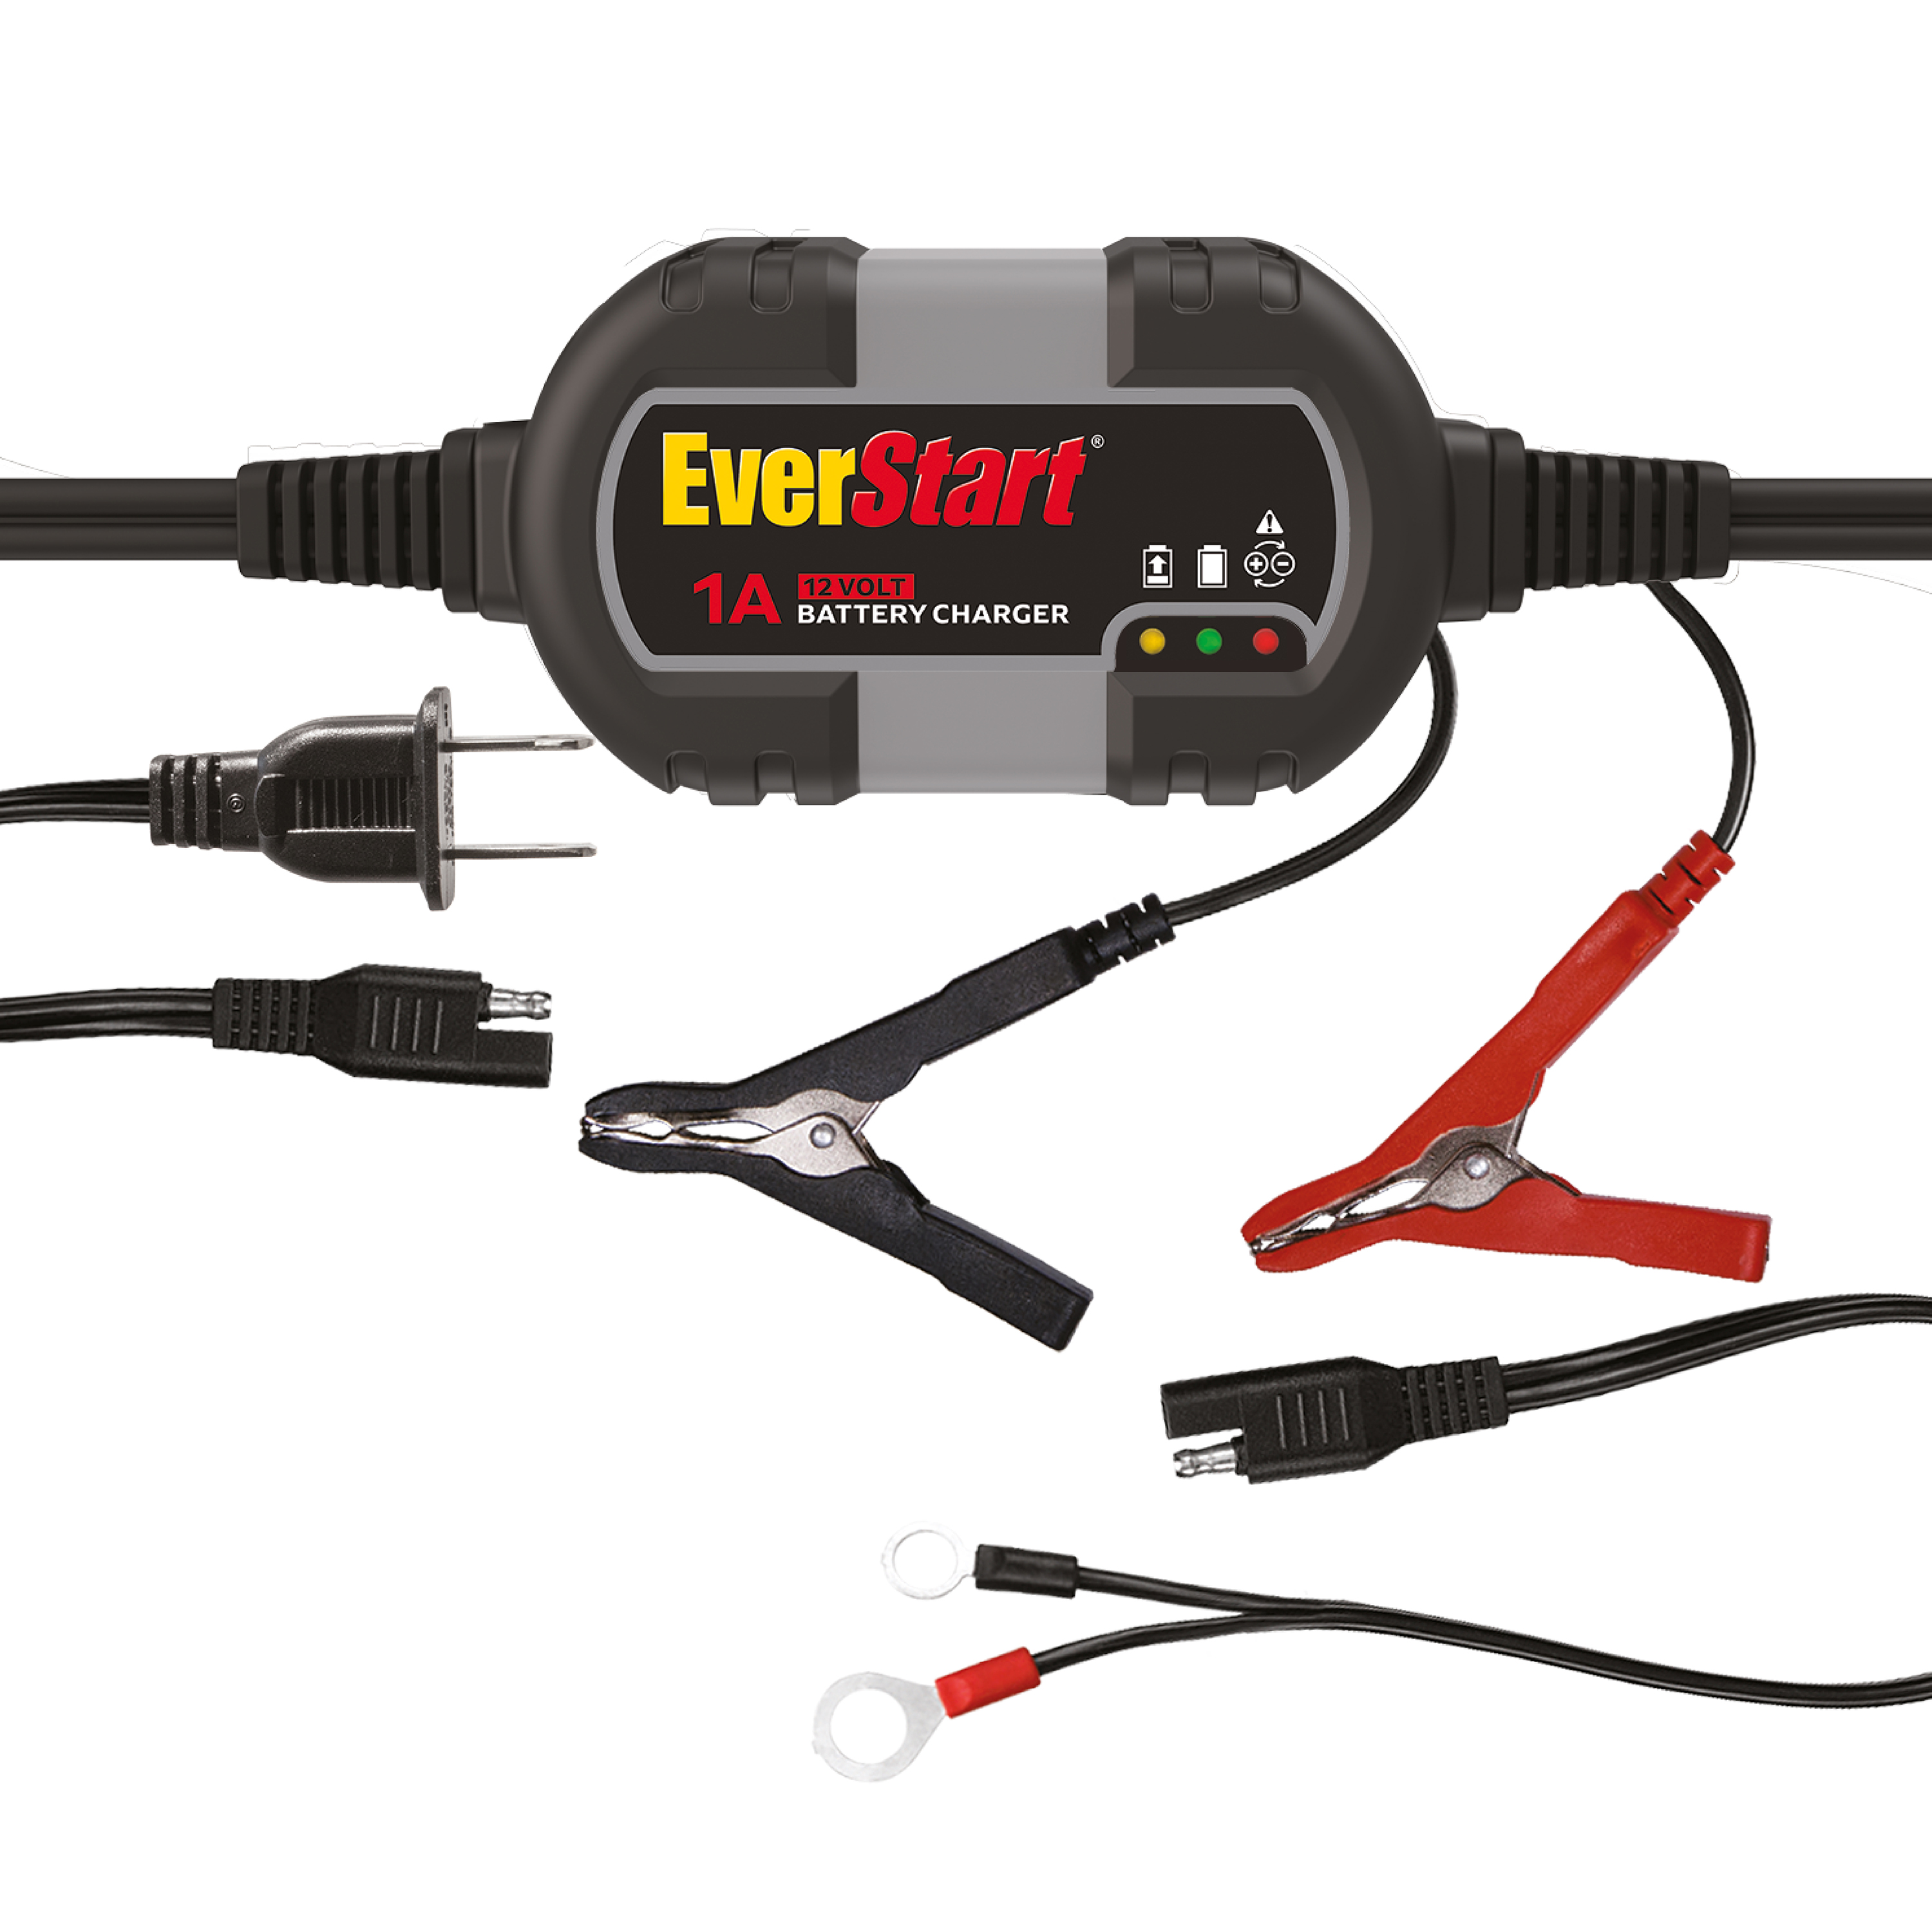 Everstart 12V Automotive/Marine Battery Charger and Maintainer (BM1E) New - image 1 of 7